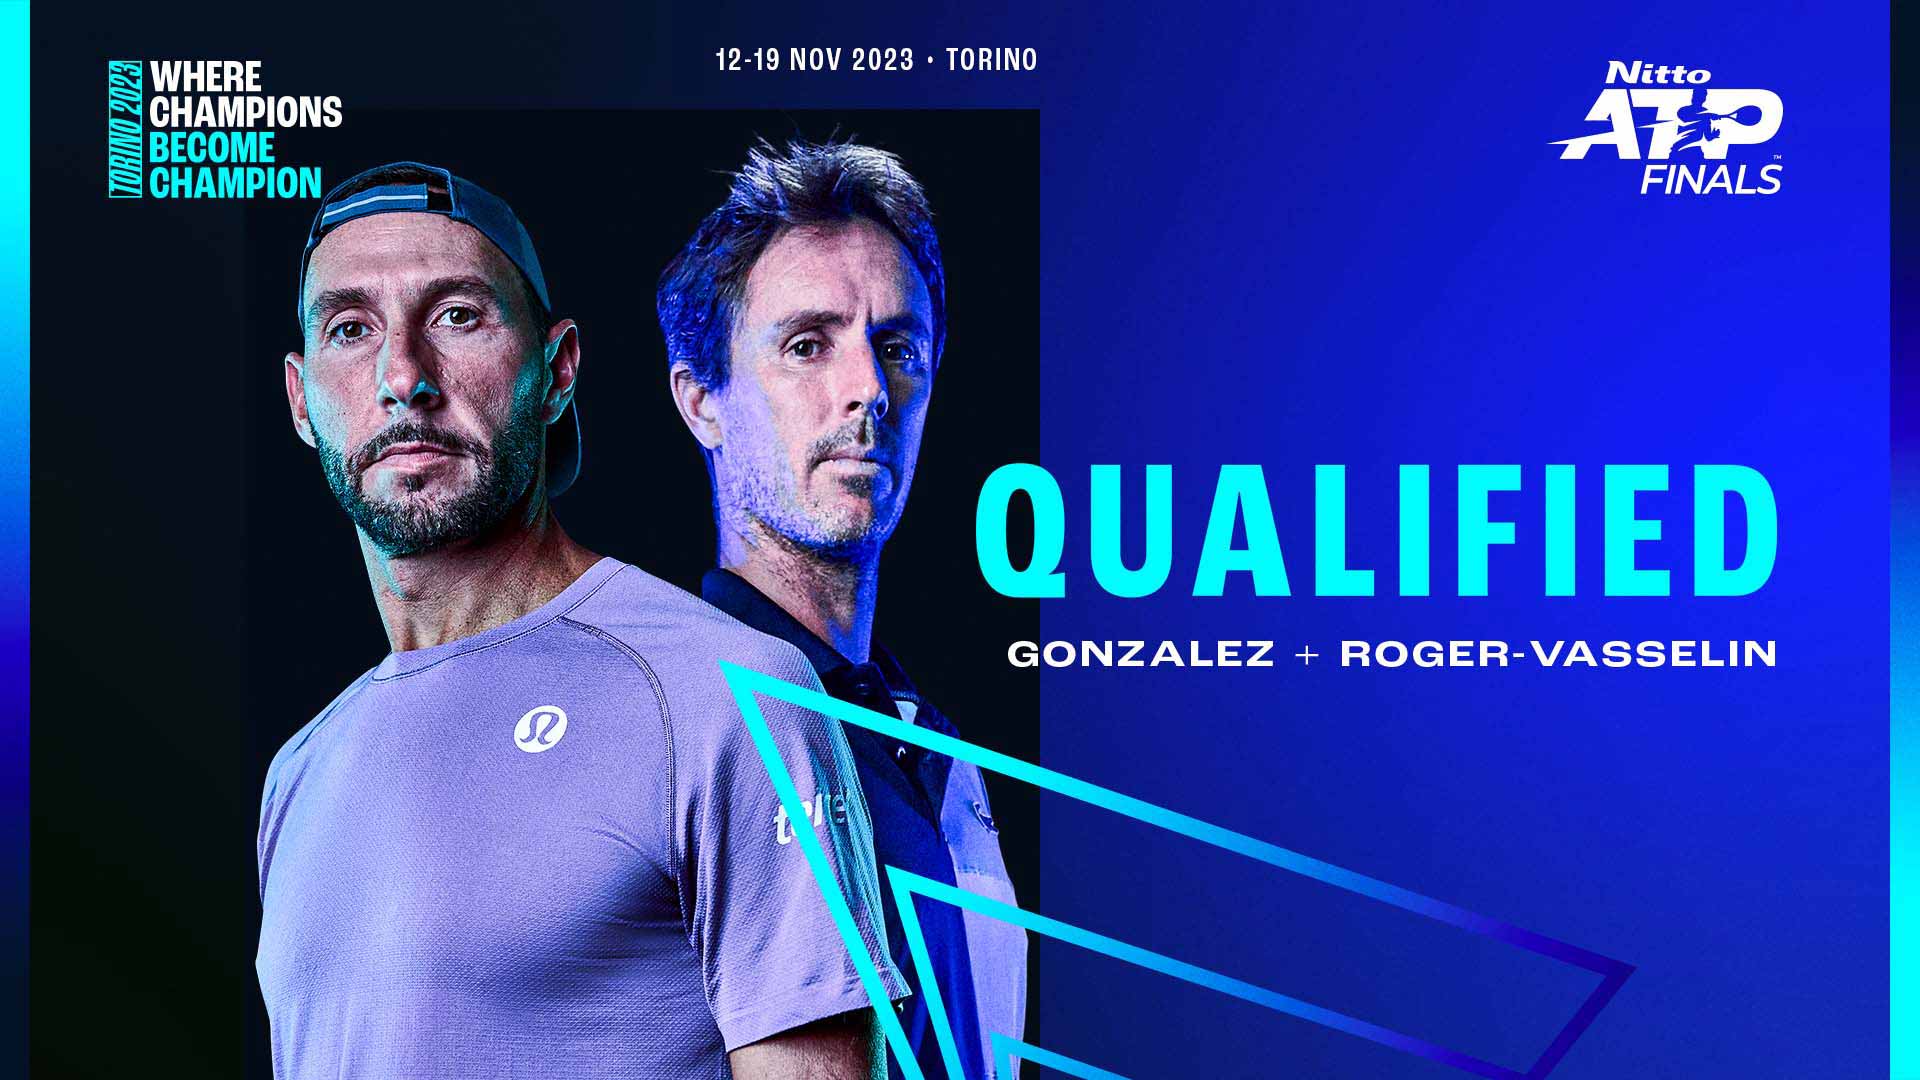 Santiago Gonzalez and Edouard Roger-Vasselin will make their team debut at the Nitto ATP Finals.